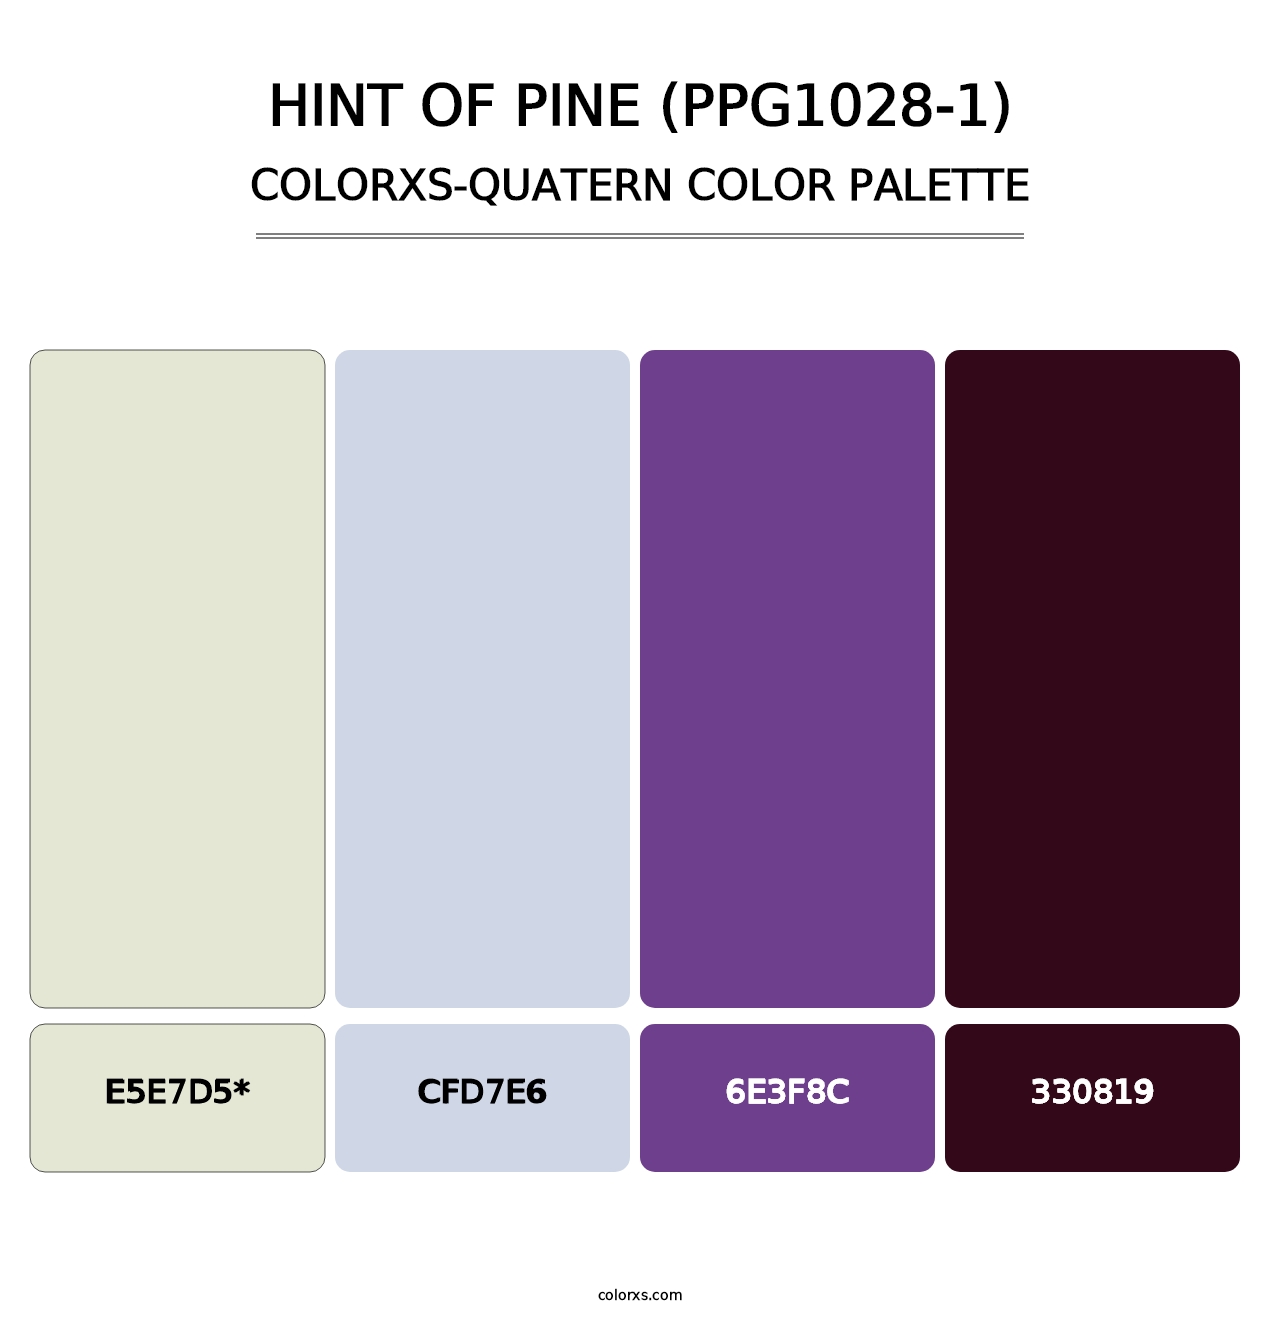 Hint Of Pine (PPG1028-1) - Colorxs Quatern Palette